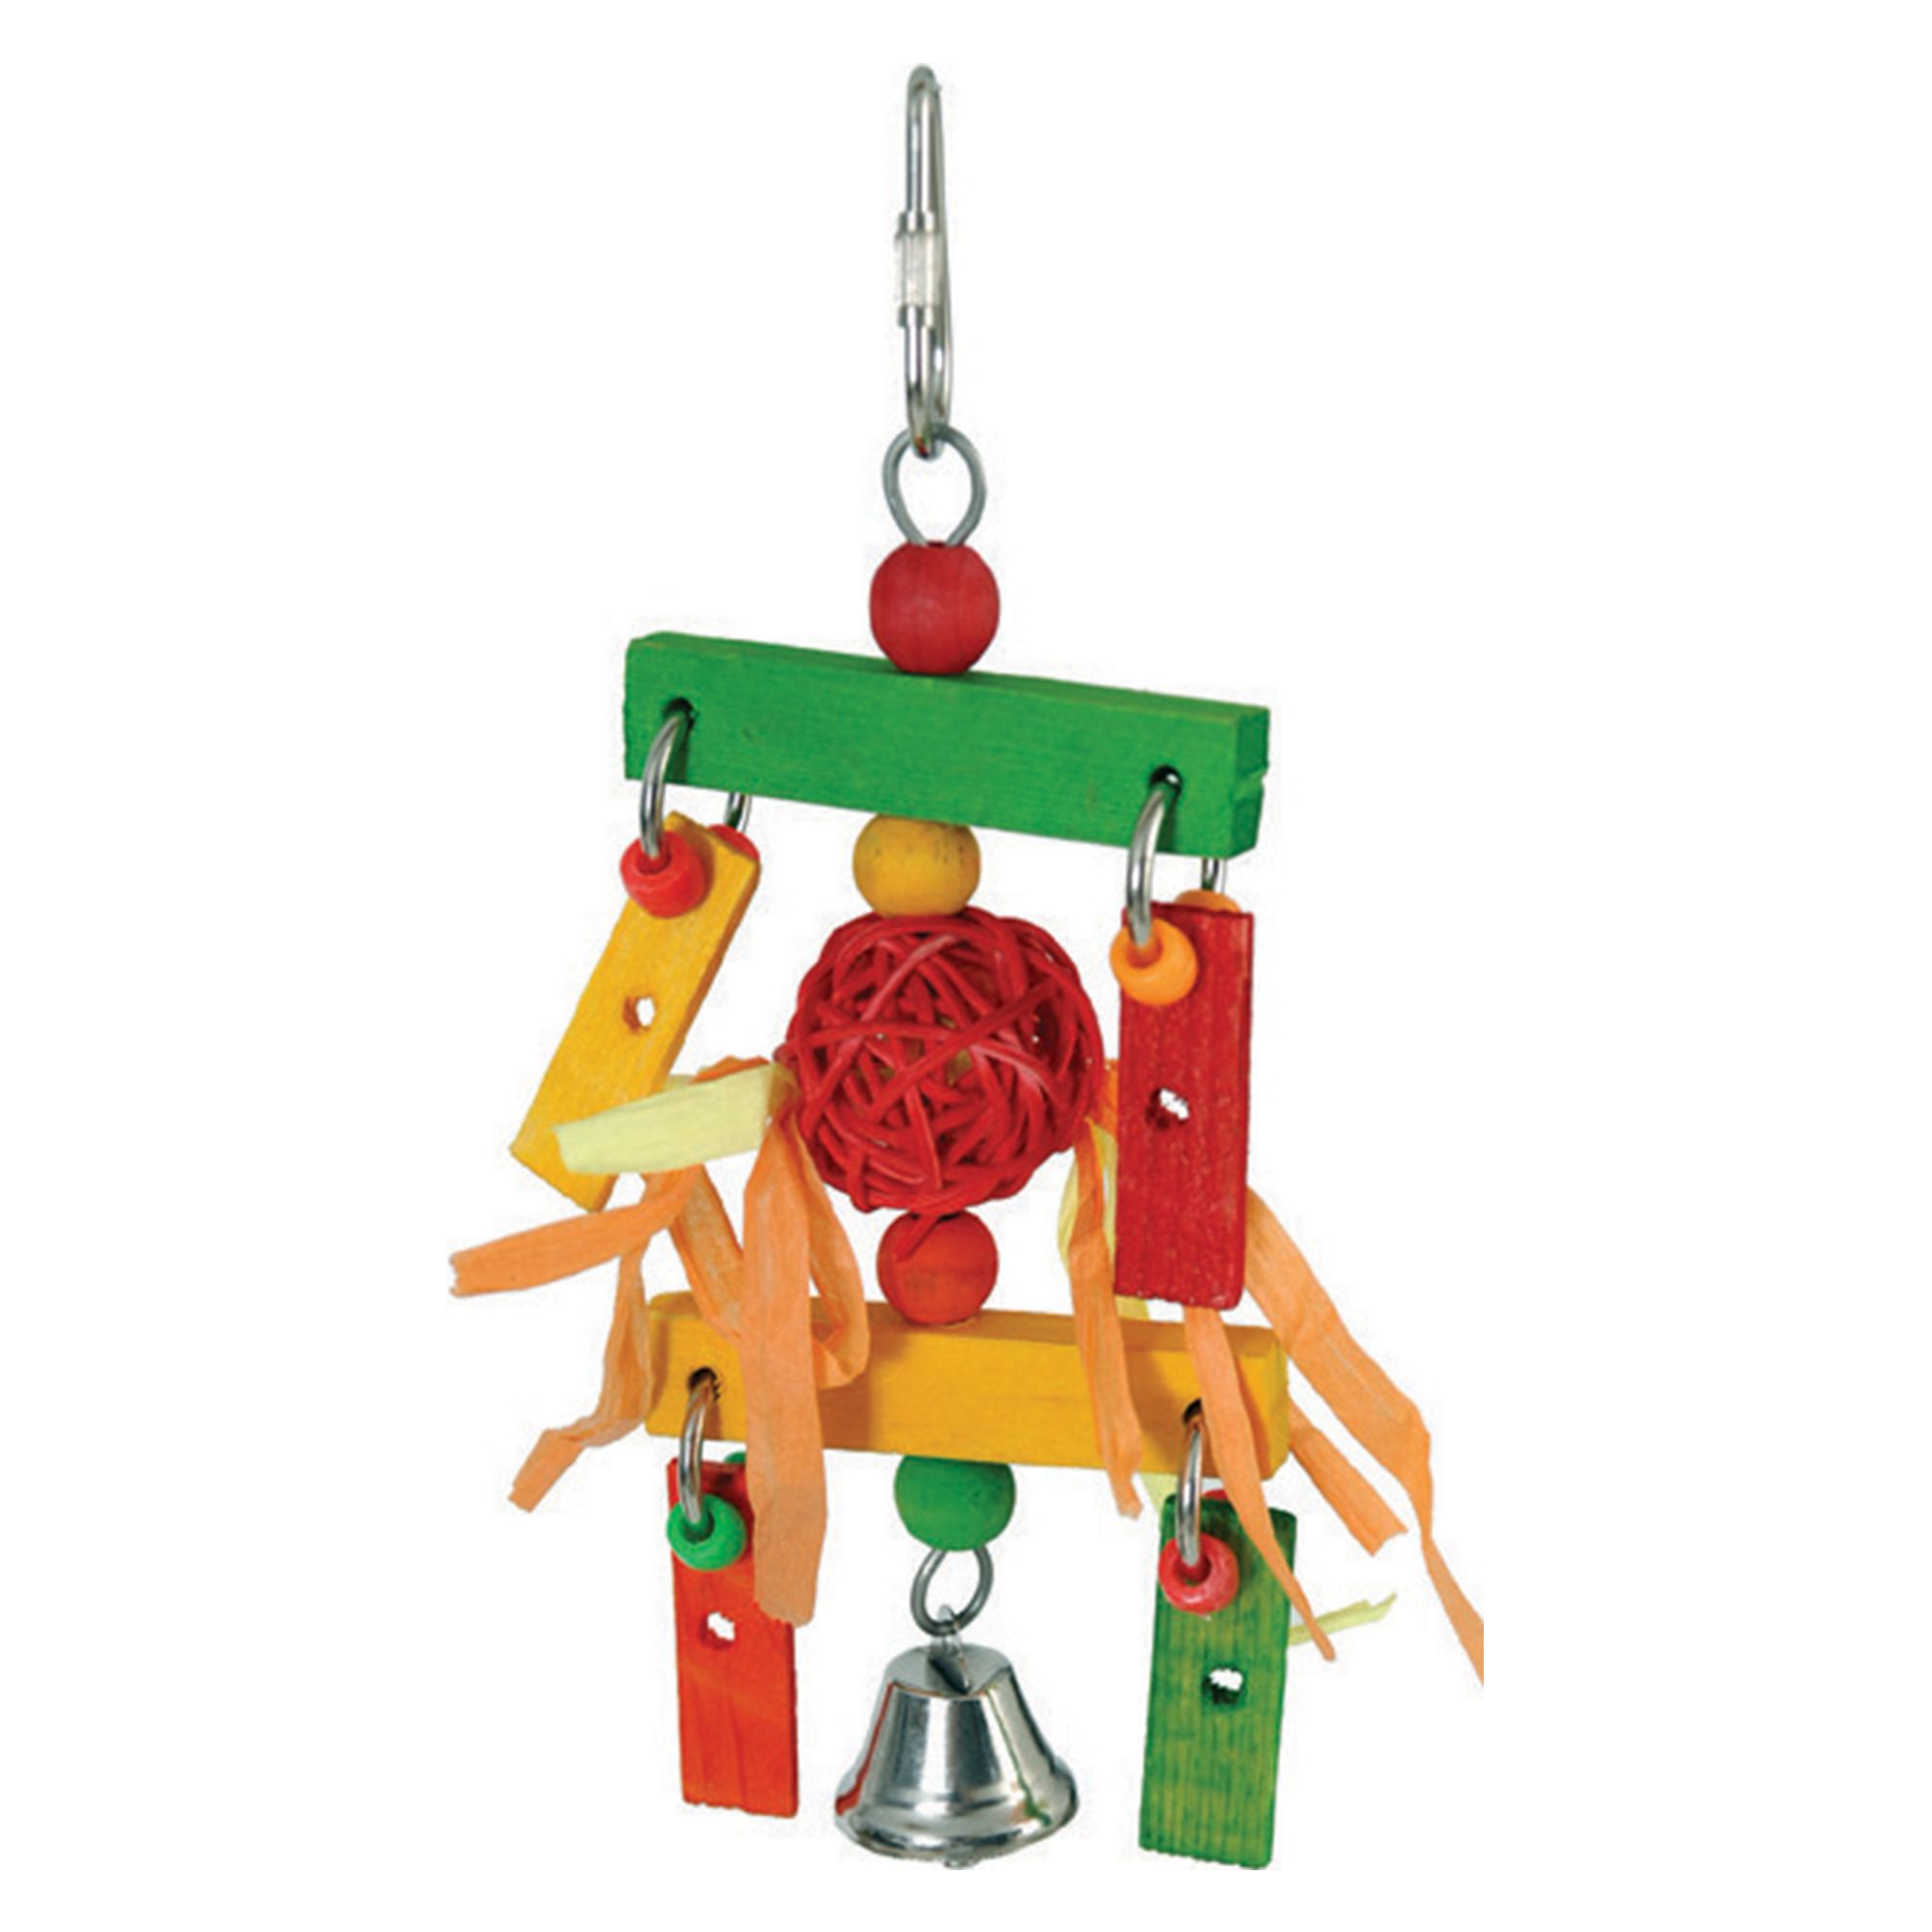 Wooden Wind Chime Bird Toy